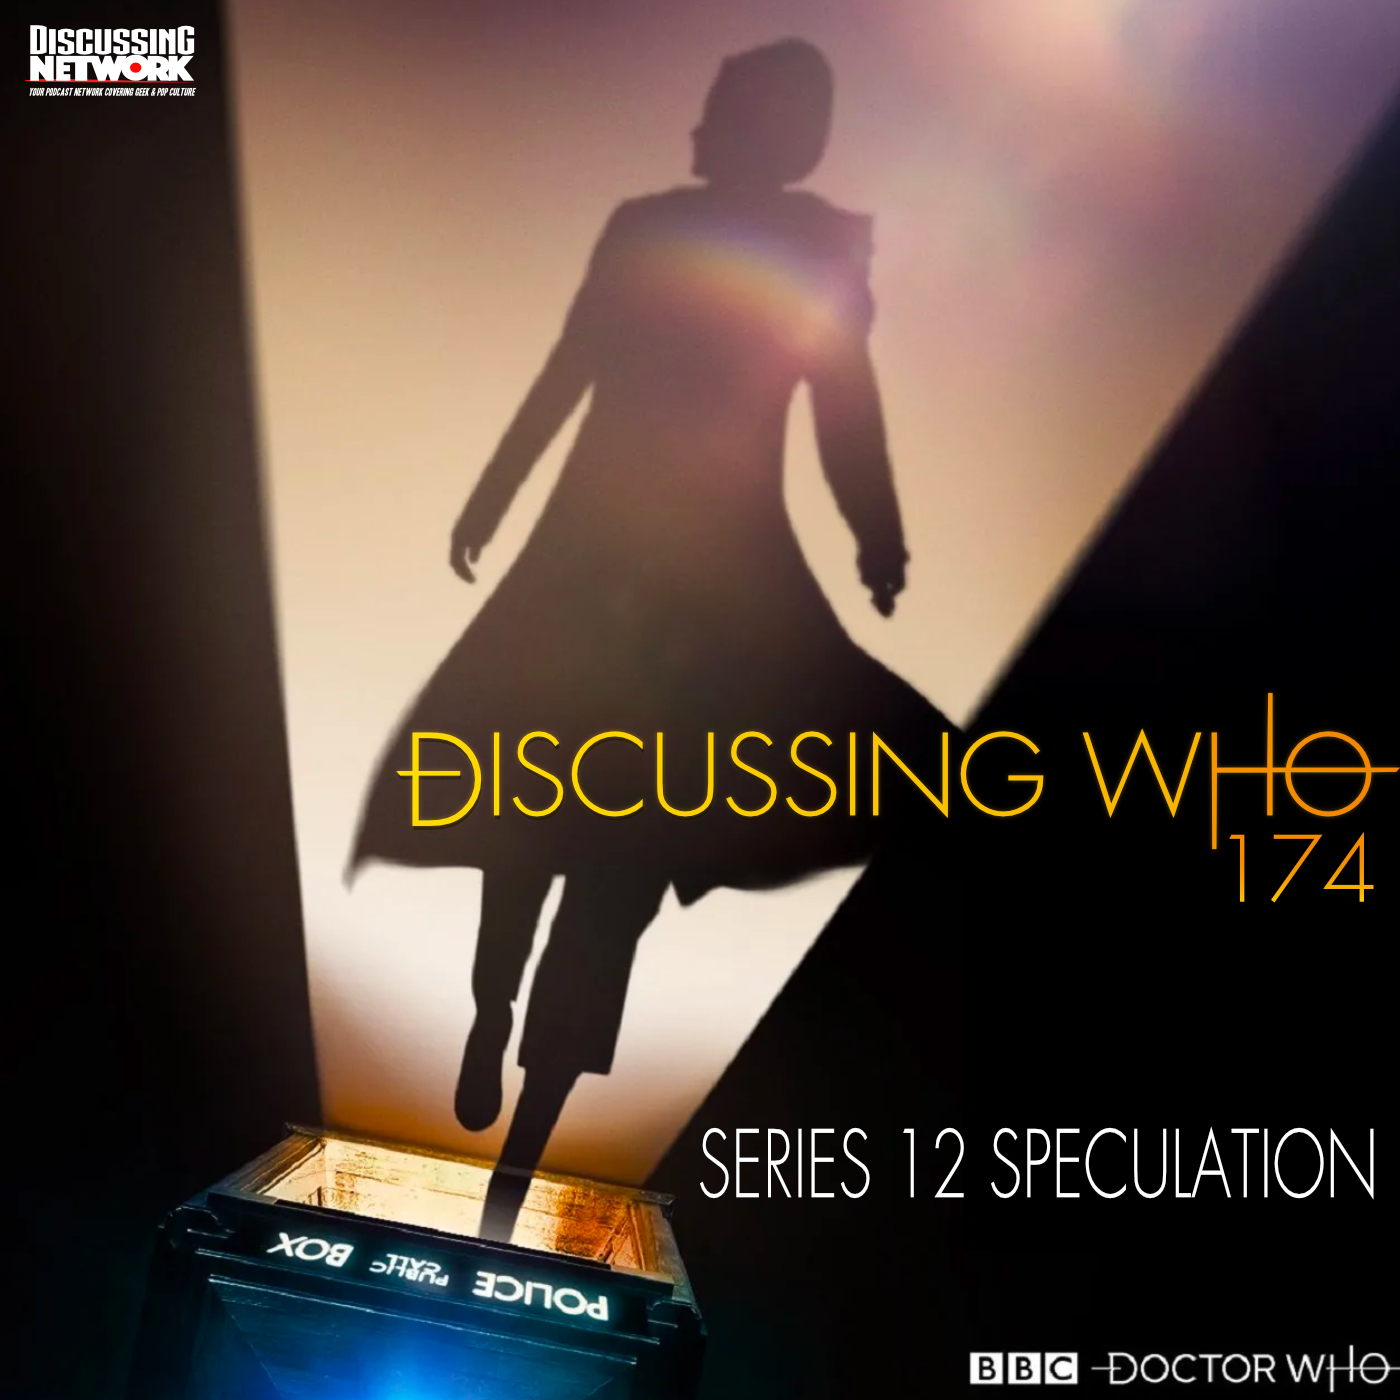 Doctor Who Series 12 Speculation and Trailer Review